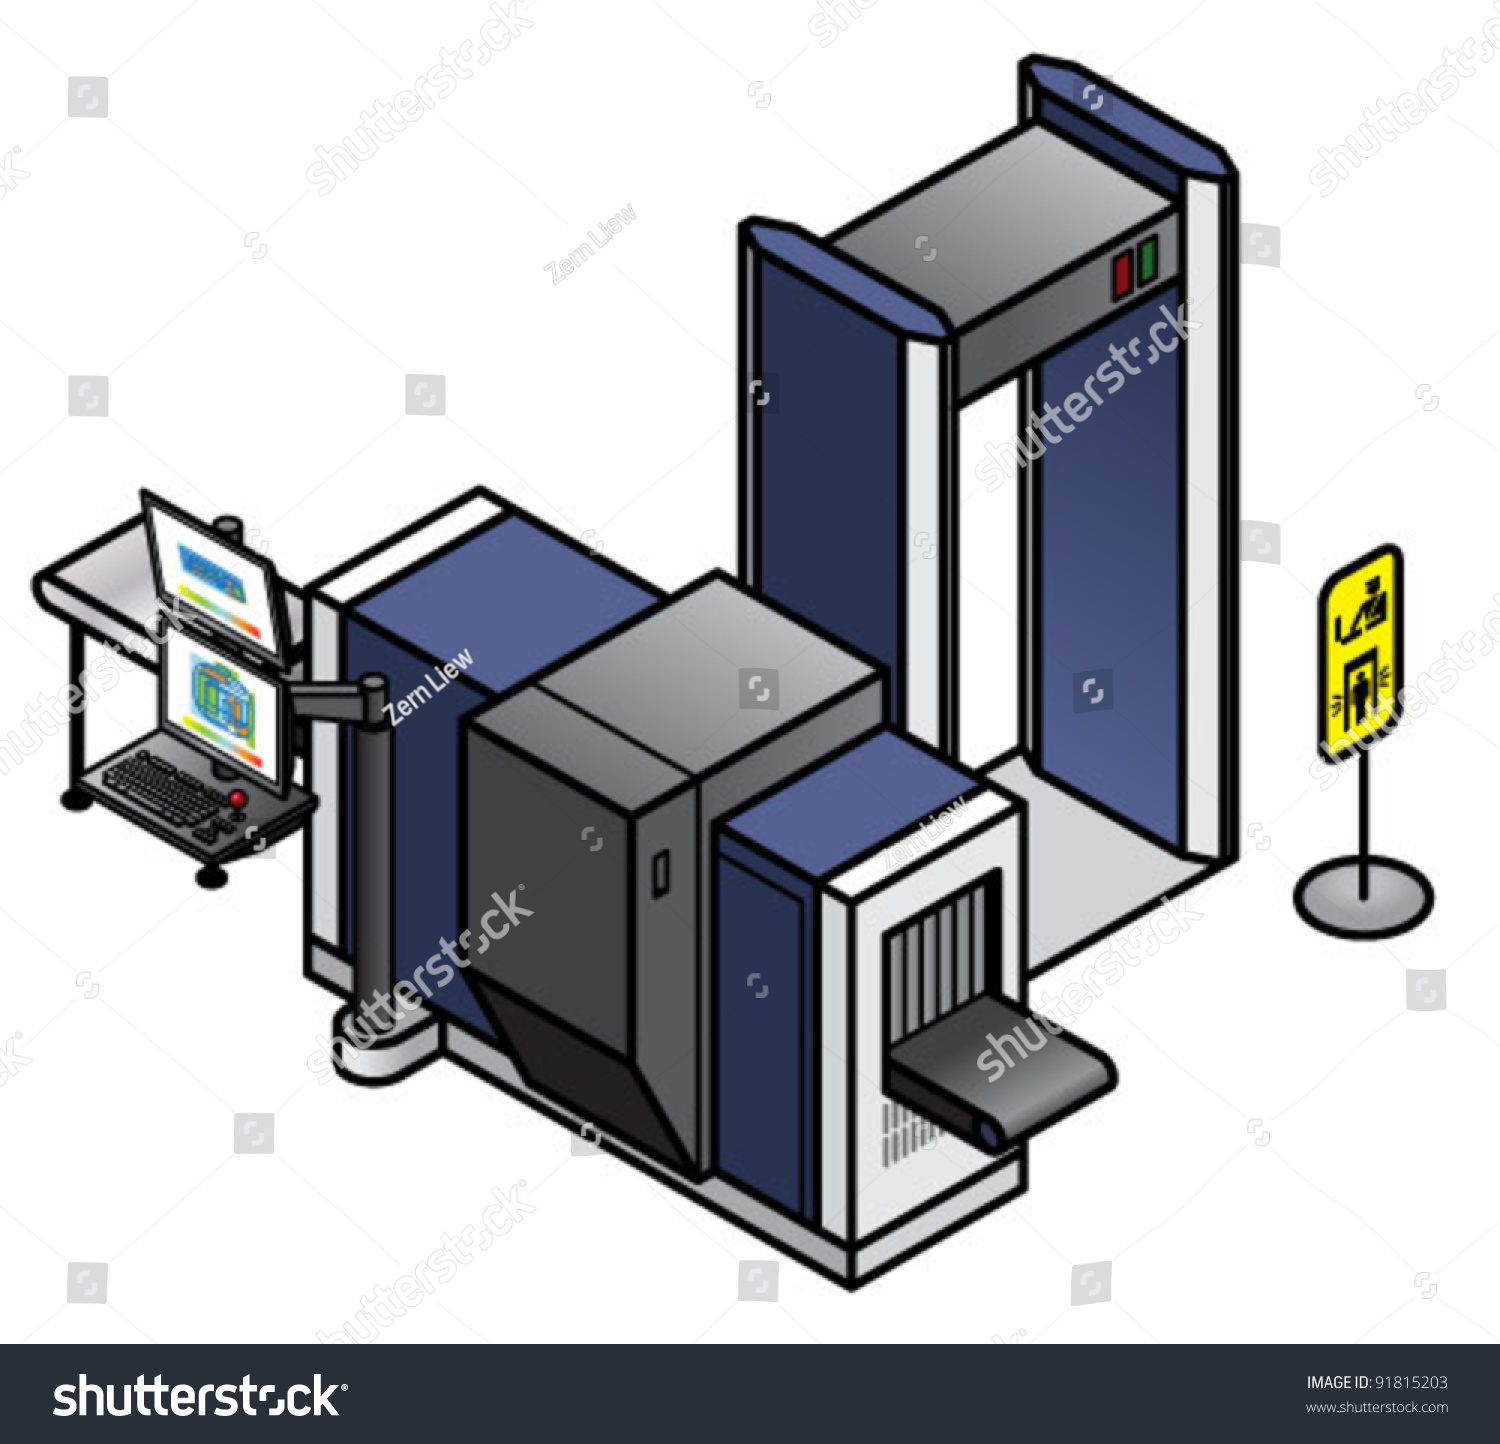 clipart security services - photo #48